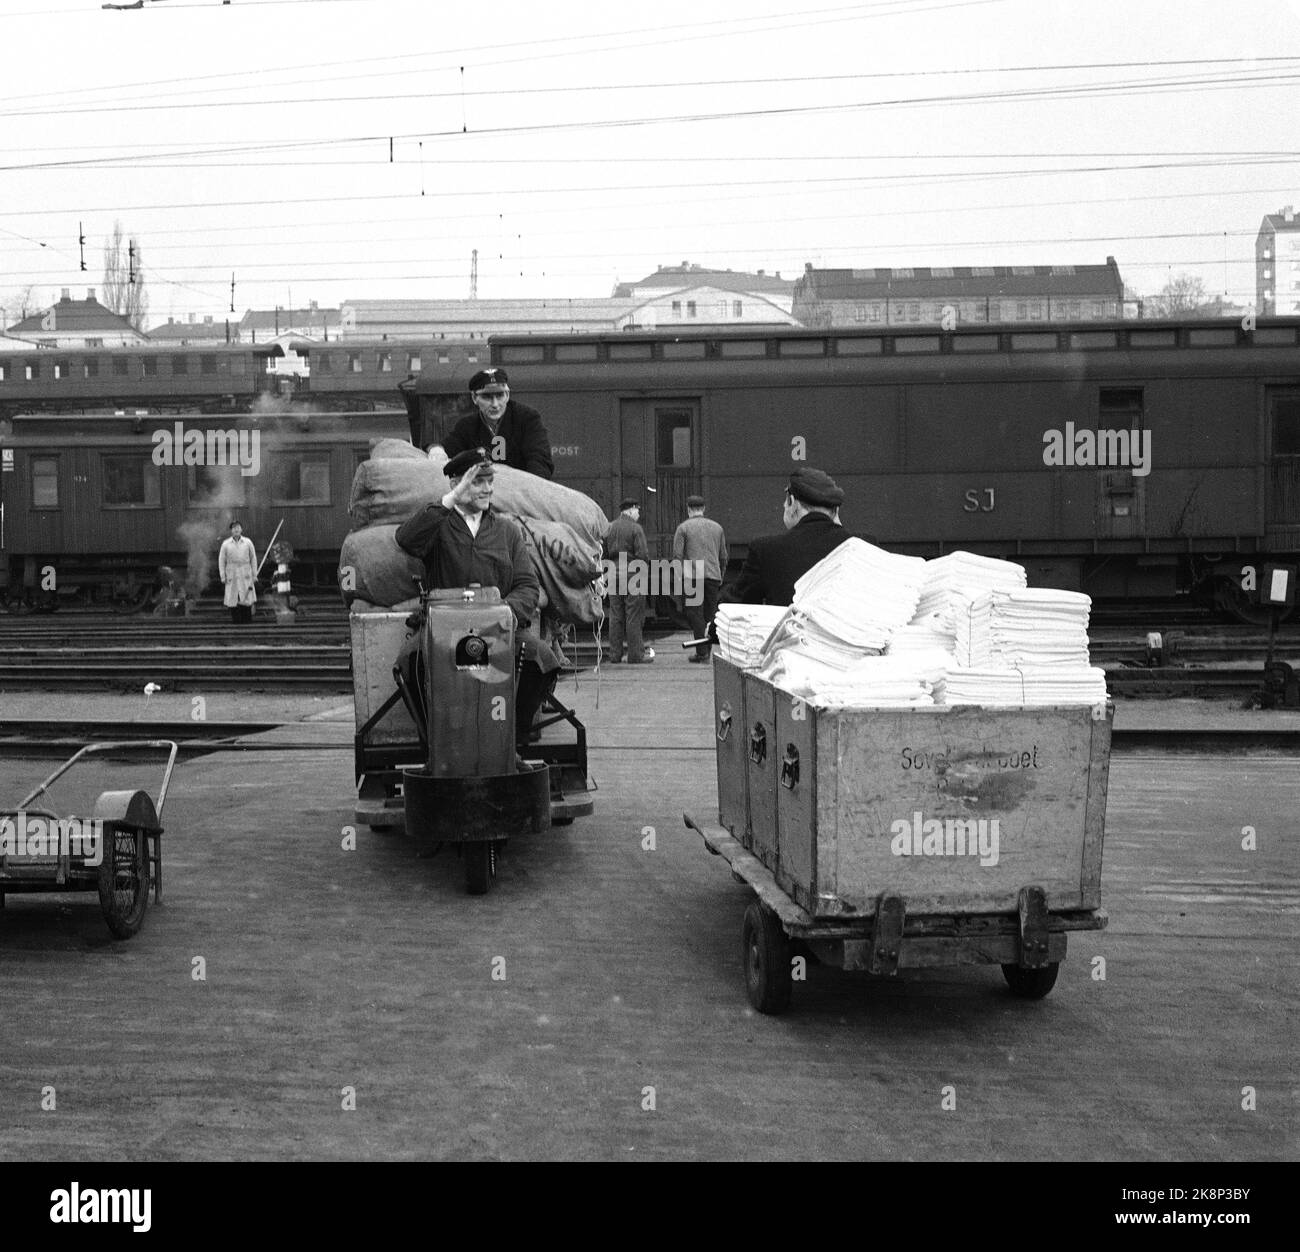 Oslo 19600106: In 1960, NSB had 3212 beds in their sleeping wagons, and they became increasingly popular. Every day, an army of cleaners moved into NSB's area in Lodalen, to wash, clear and change bedding. Dirty clothes out, clean cloth in. The cleaning staff greets, while driving the small motorized wagons with bed change to and from NSB's laundry in Lodalen, where in 1959 1.5 million kilos of cloth was washed only from the sleepers. Around Christmas there are often 3000 sheets per day! Photo: Ivar Aaserud / Current / NTB Stock Photo